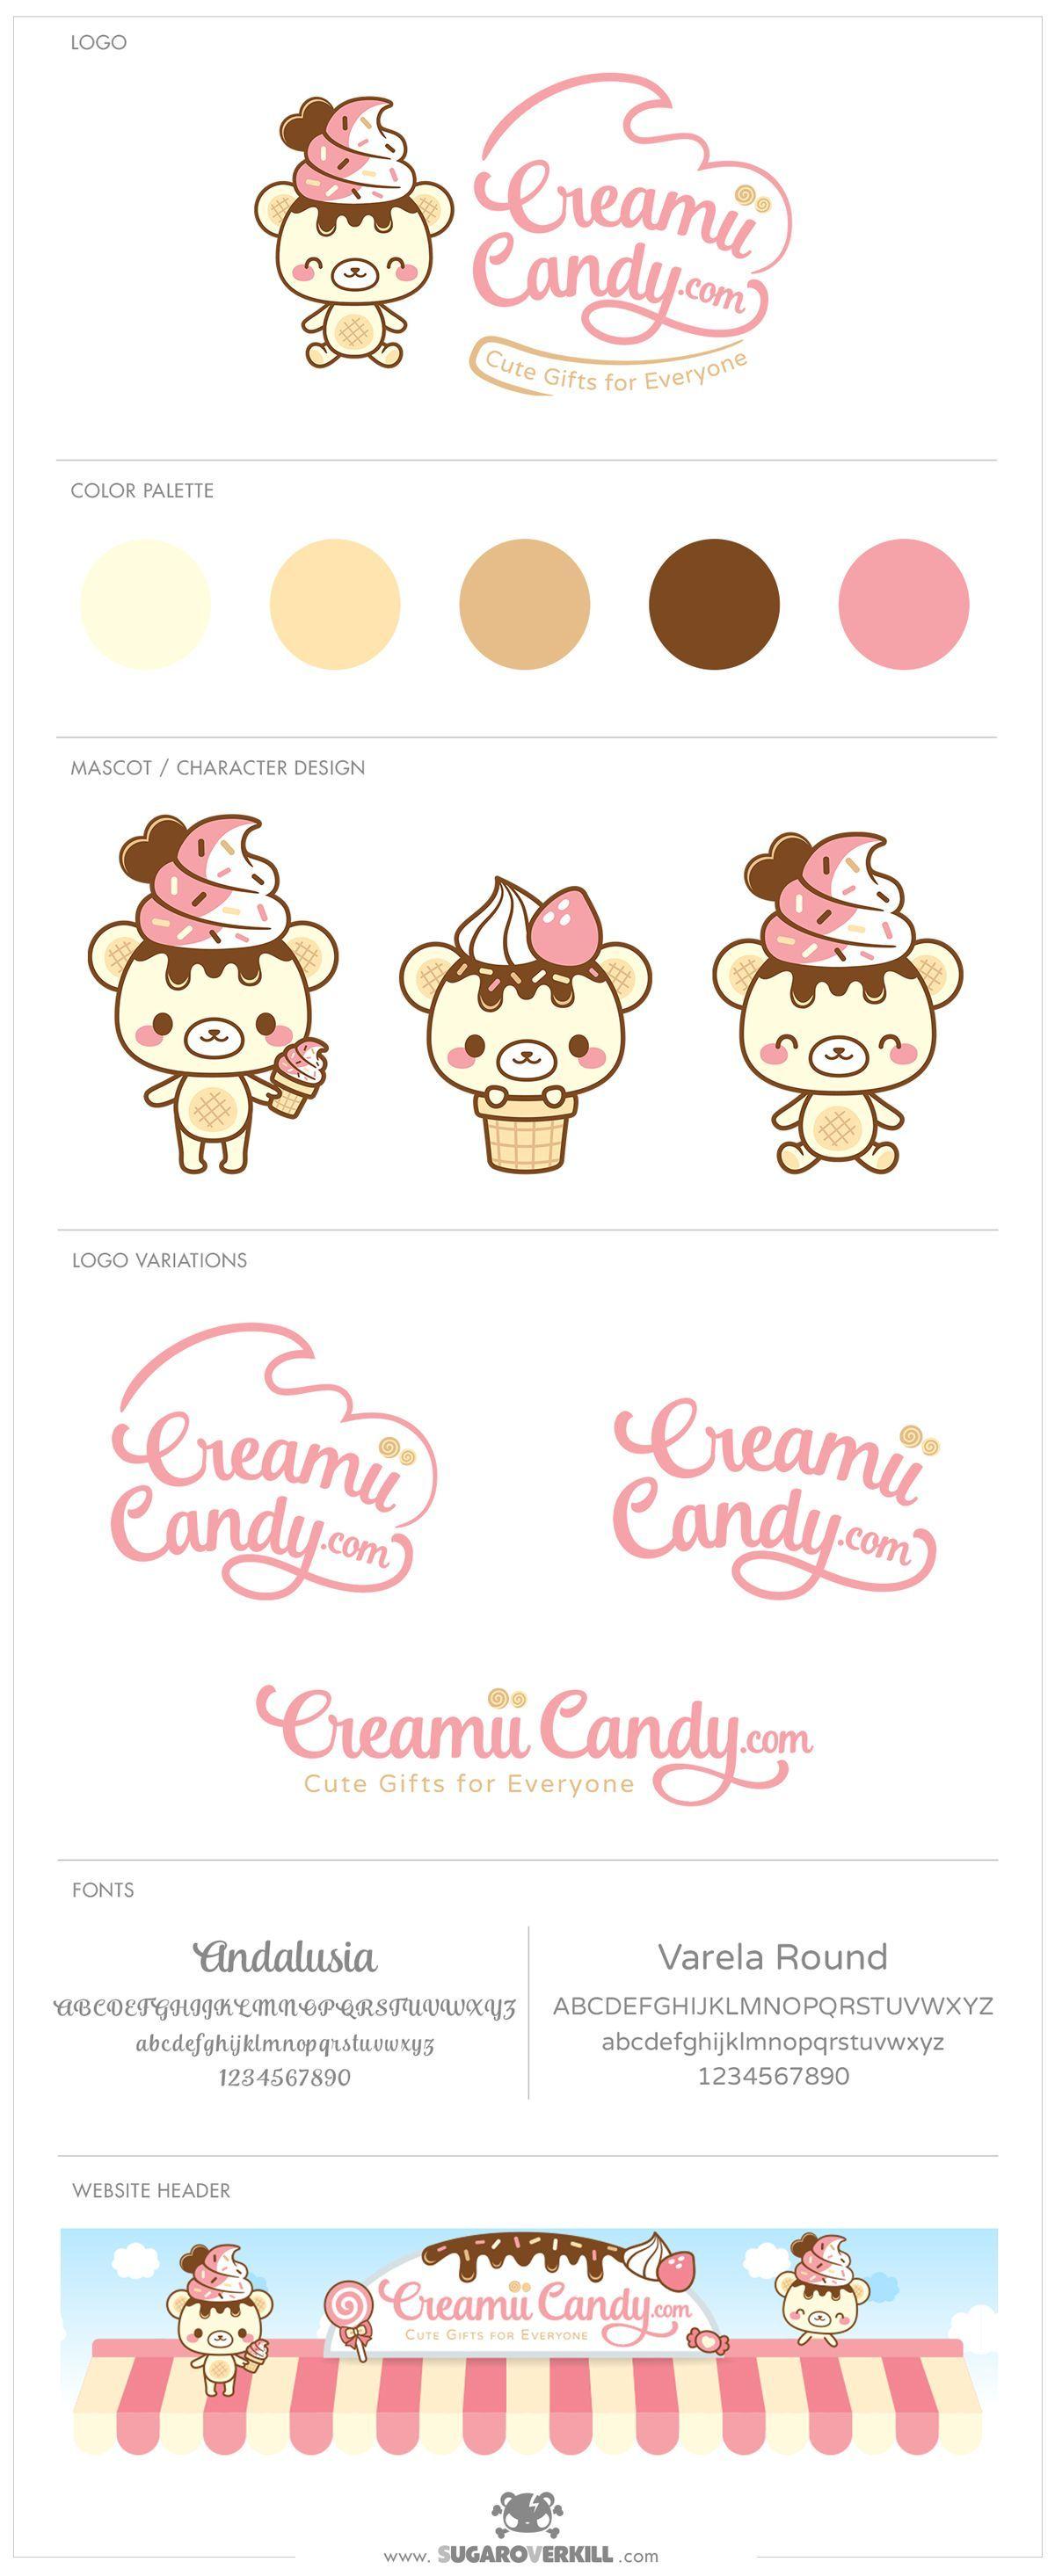 Kawii Logo - A Kawaii Logo and Character Design for Creamii Candy by www ...